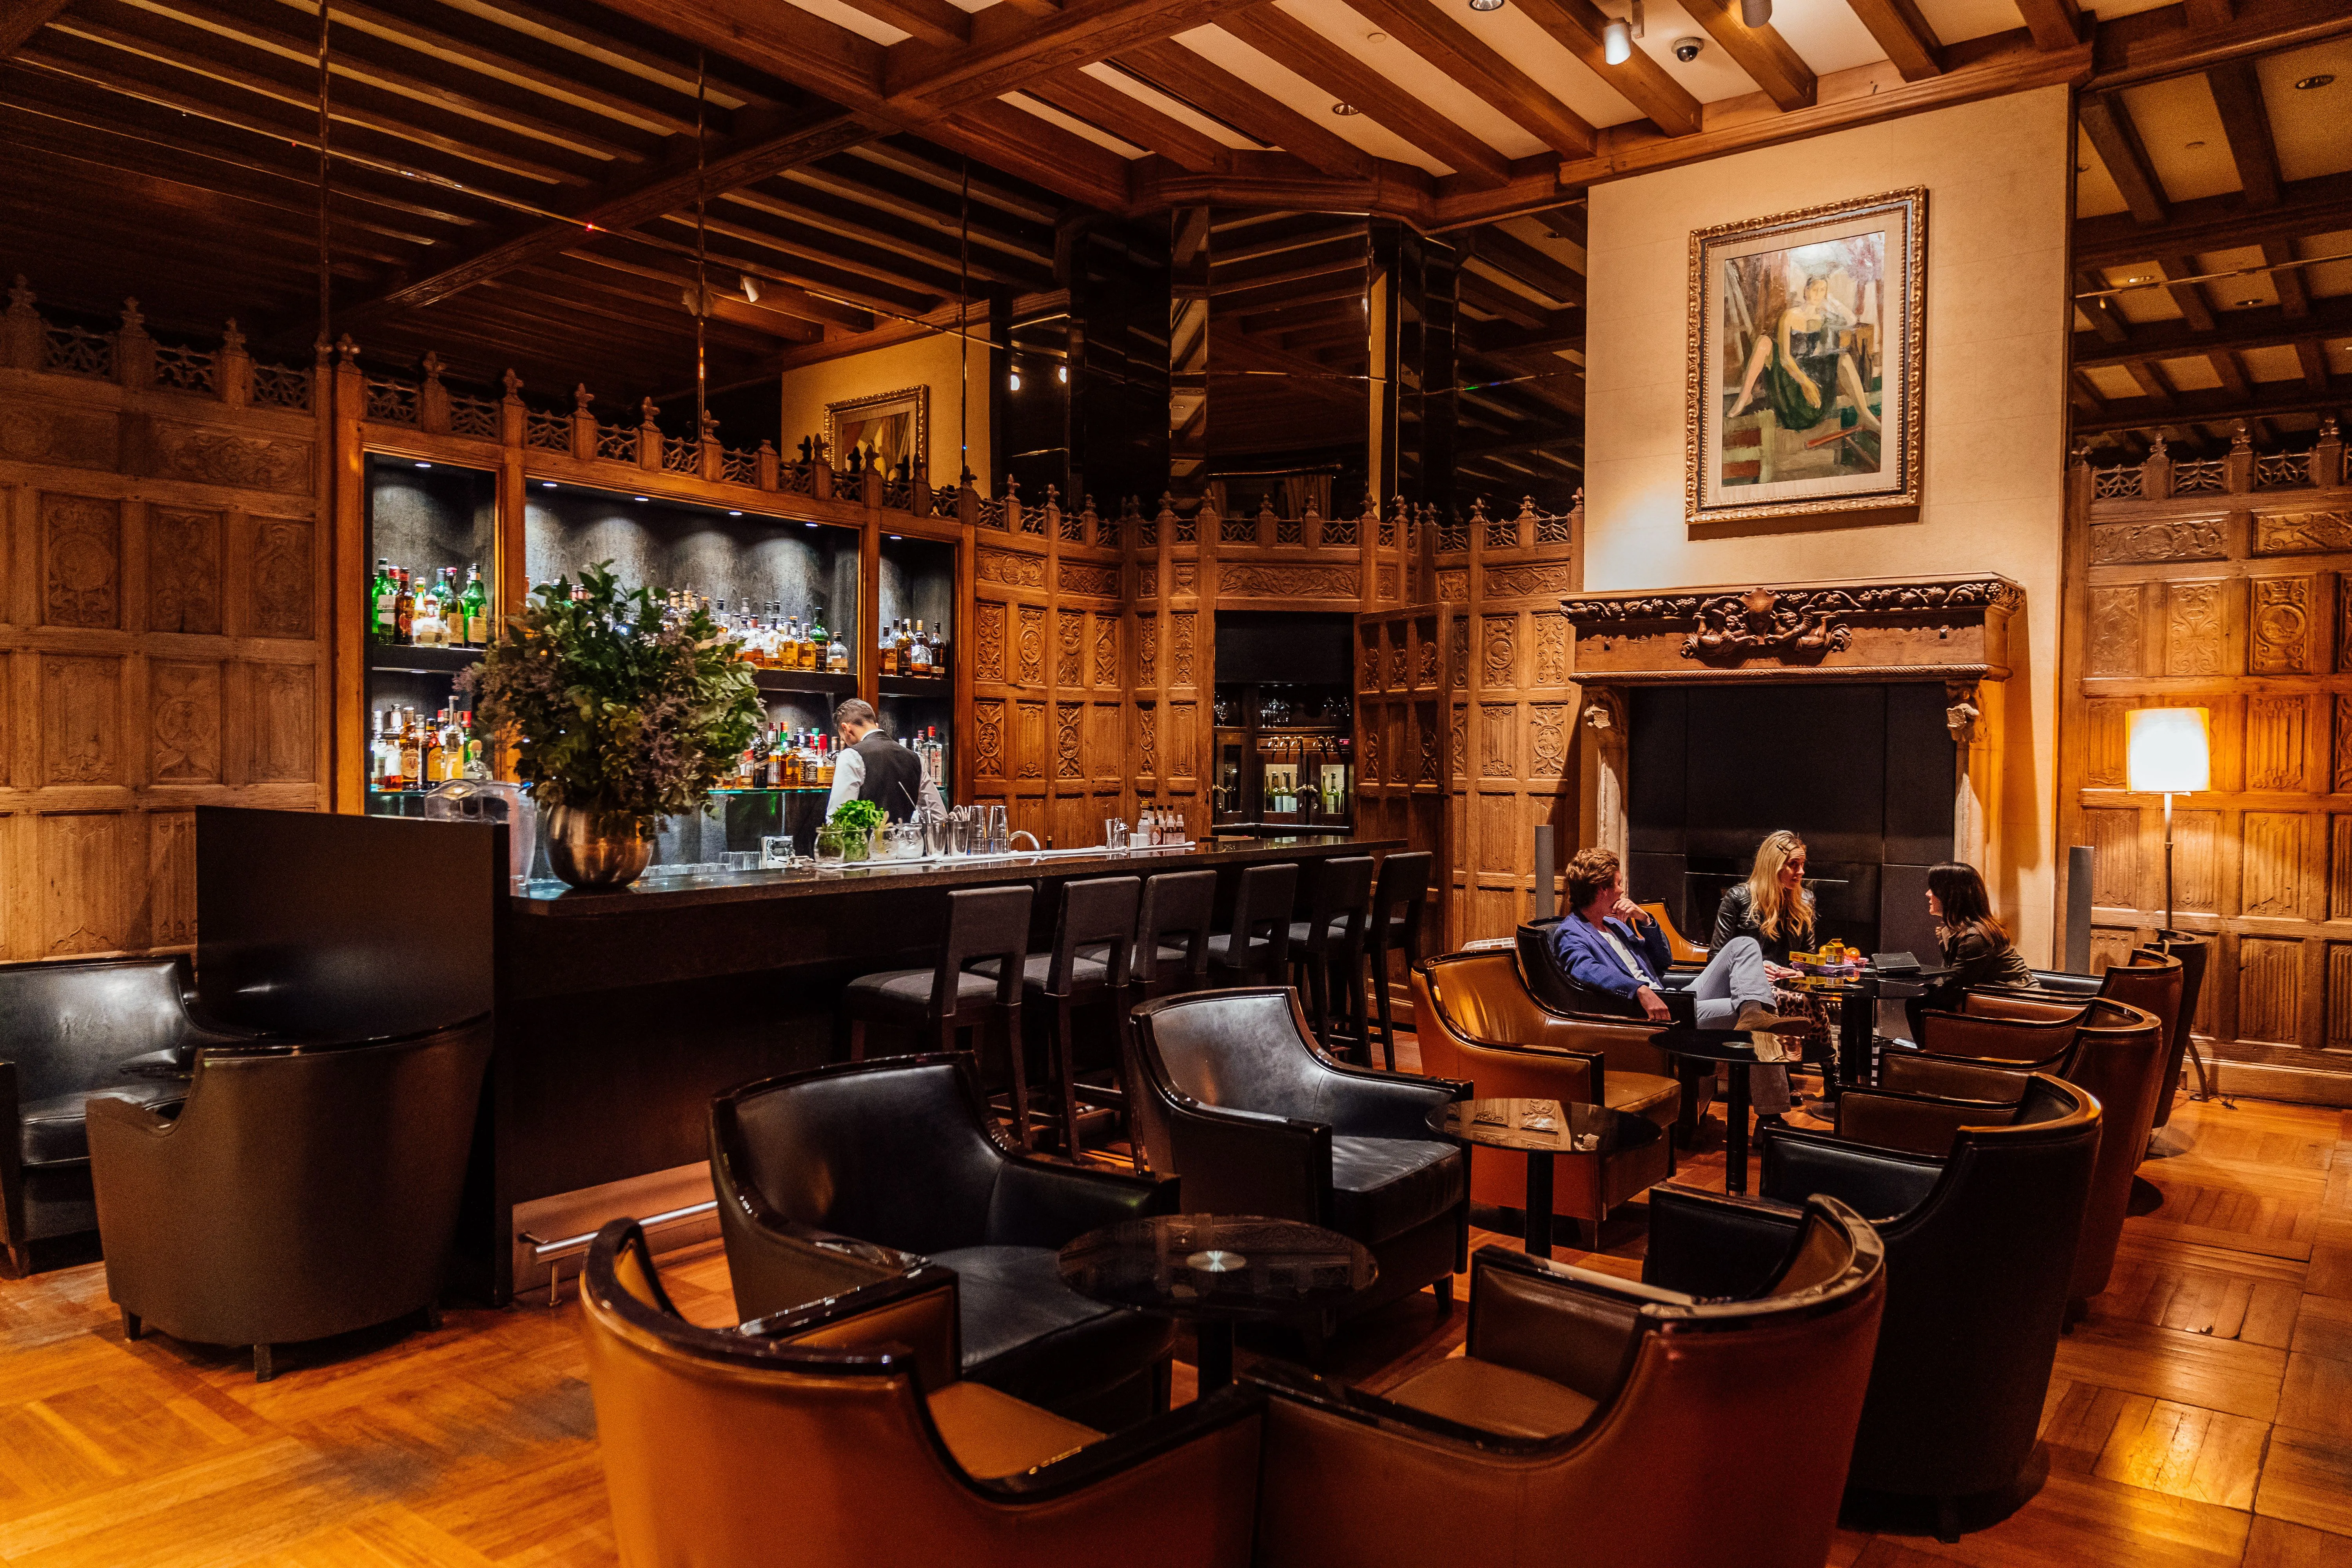 Oak Bar in Argentina, South America | Bars - Rated 3.8